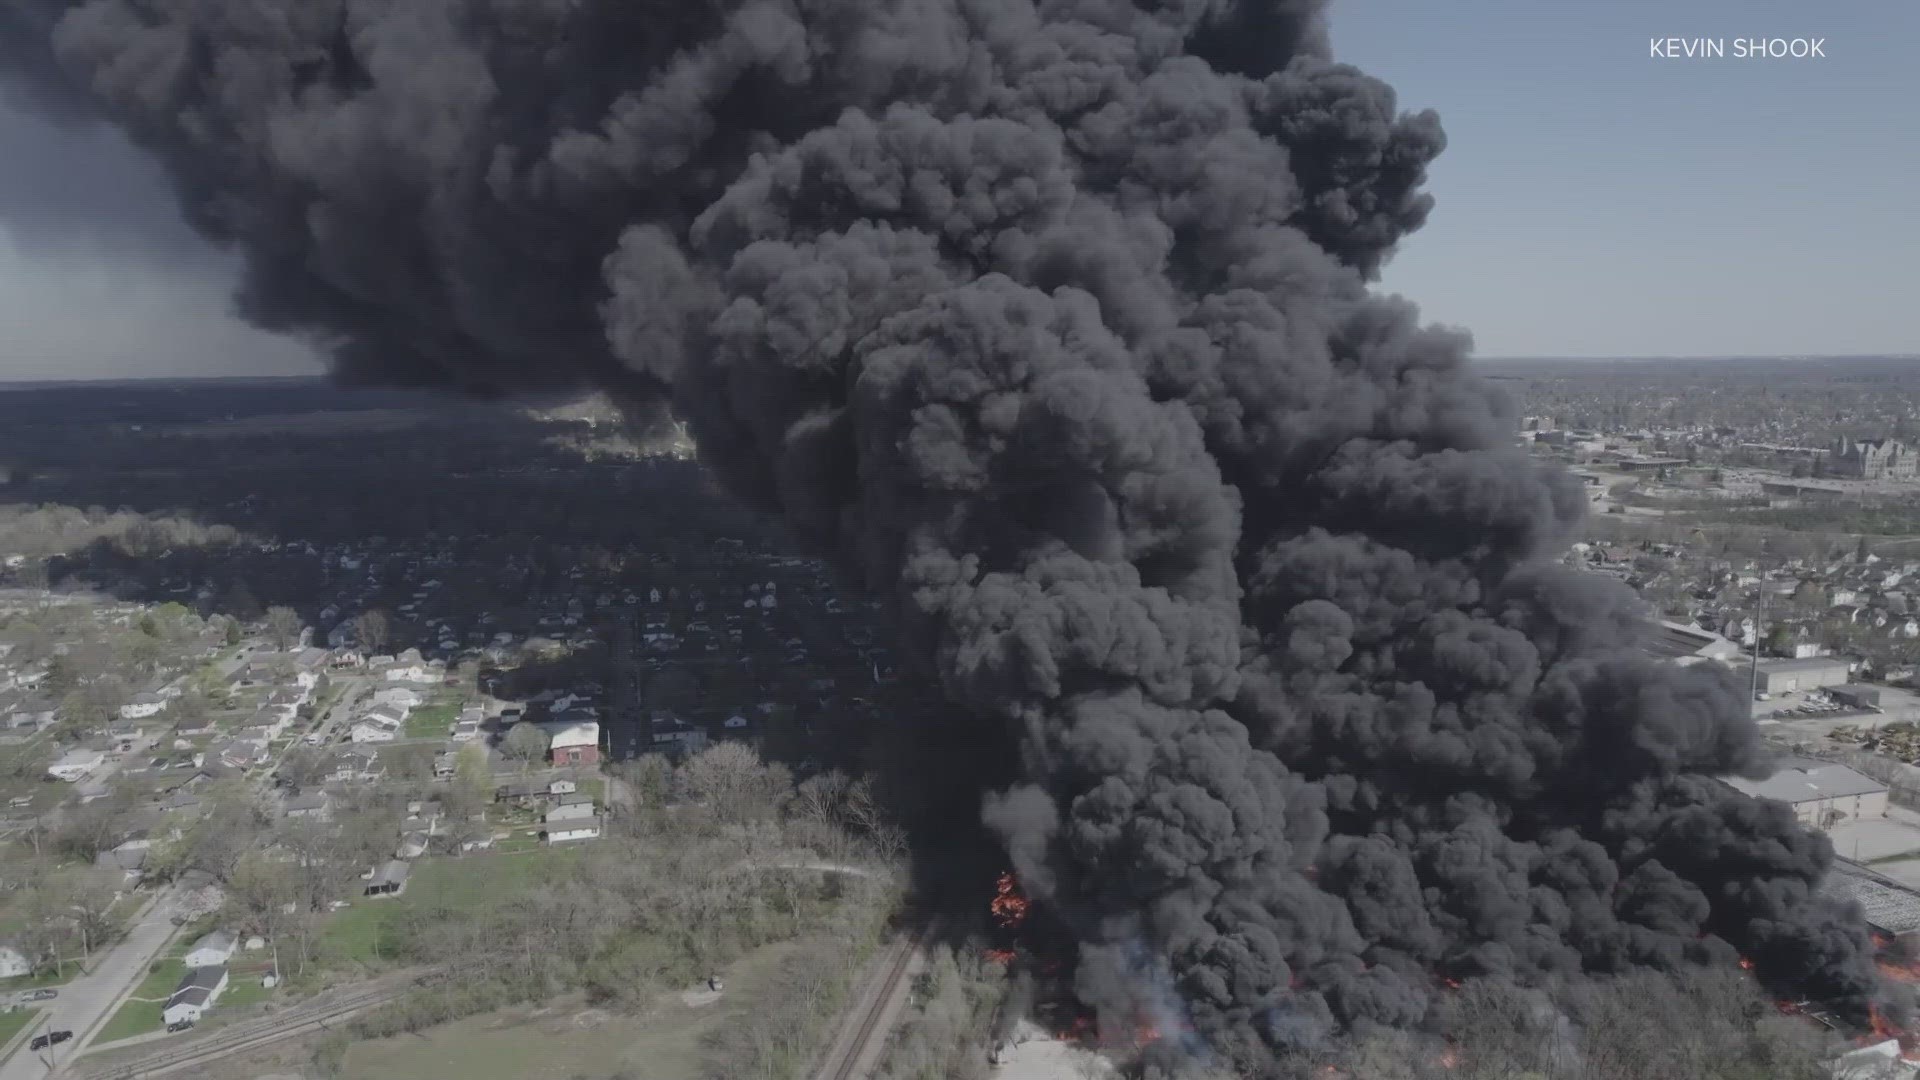 The city released images from 2019 showing piles of recyclables that leaders feared could – and ultimately did – fuel a massive fire.